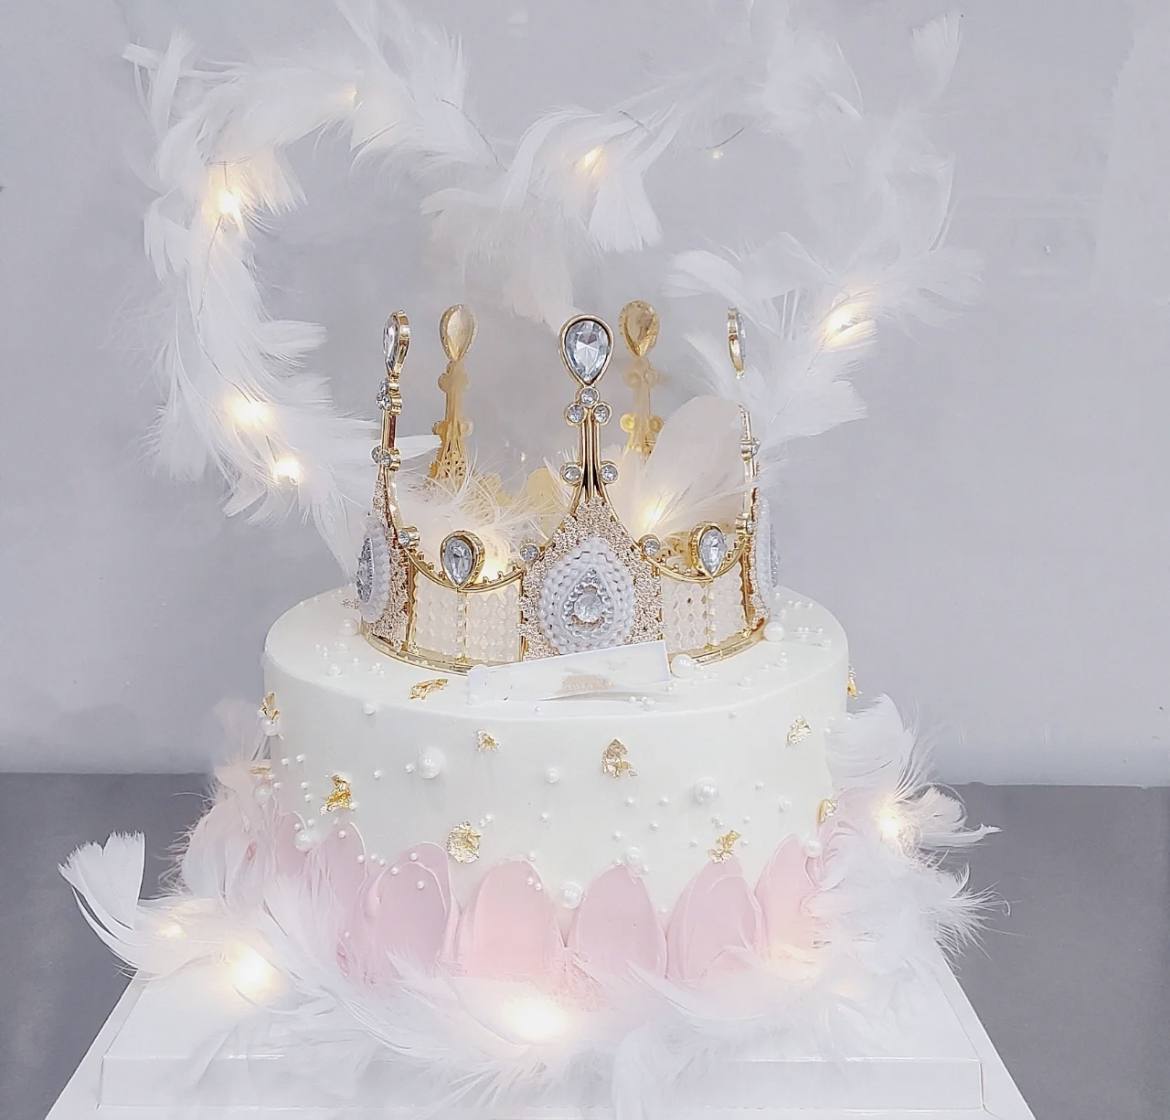 Little Princess Crown Cake Delivery Chennai, Order Cake Online Chennai, Cake  Home Delivery, Send Cake as Gift by Dona Cakes World, Online Shopping India